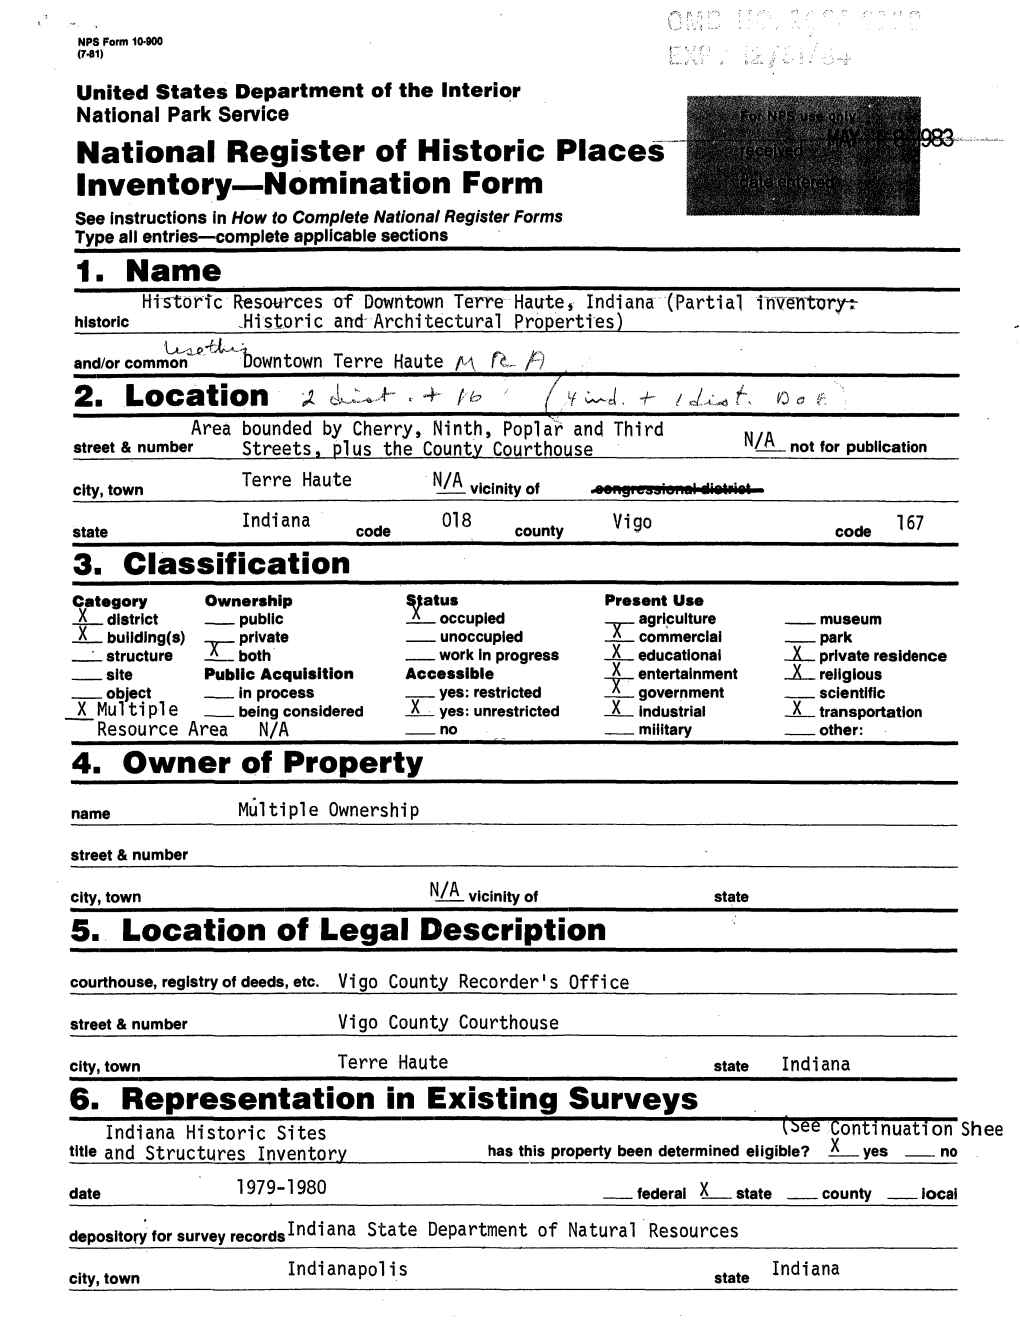 National Register of Historic Places Inventory Nomination Form 1. Name 2. Location 6. Representation in Existing Surveys